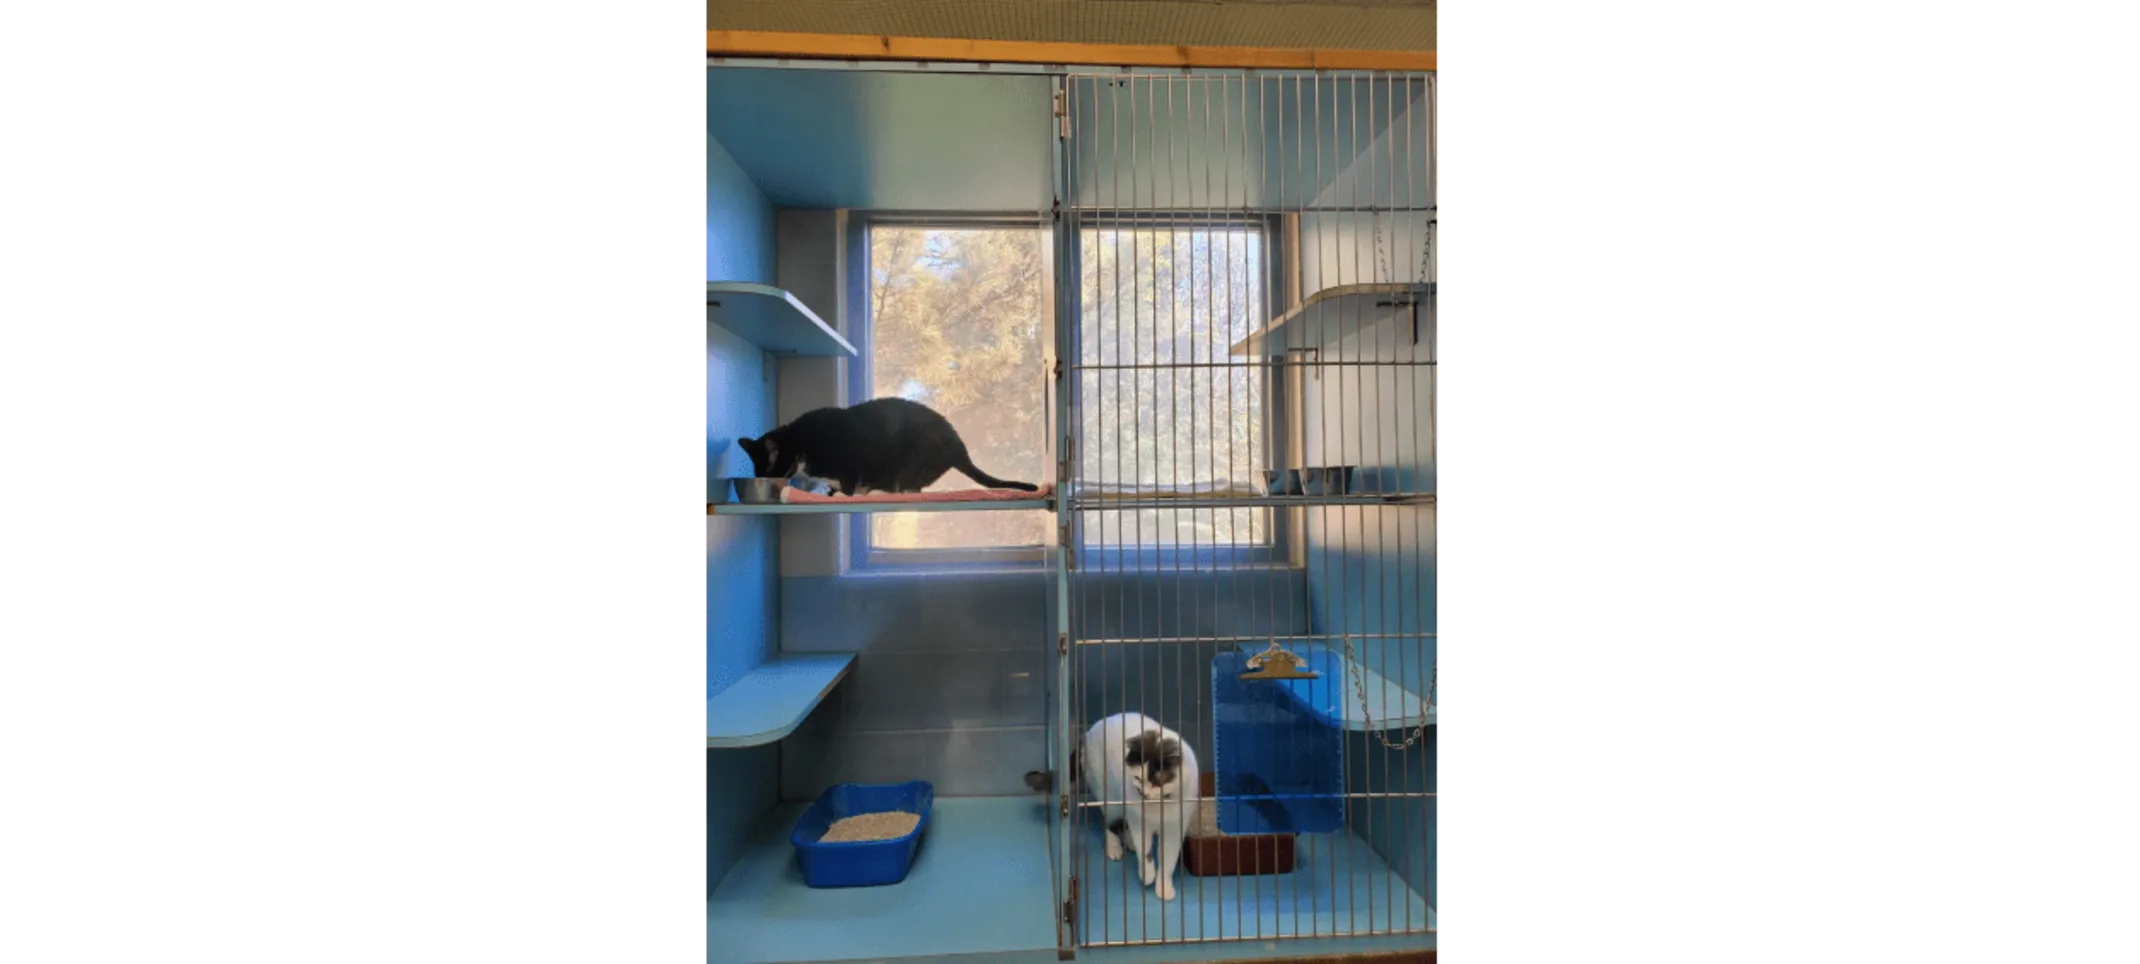 Two cats that are boarded in the cattery at Overland Animal Hospital and Pet Resort - a black cat is perched on the second story eating, while a white and grey cat is standing near a litter box on the lower level